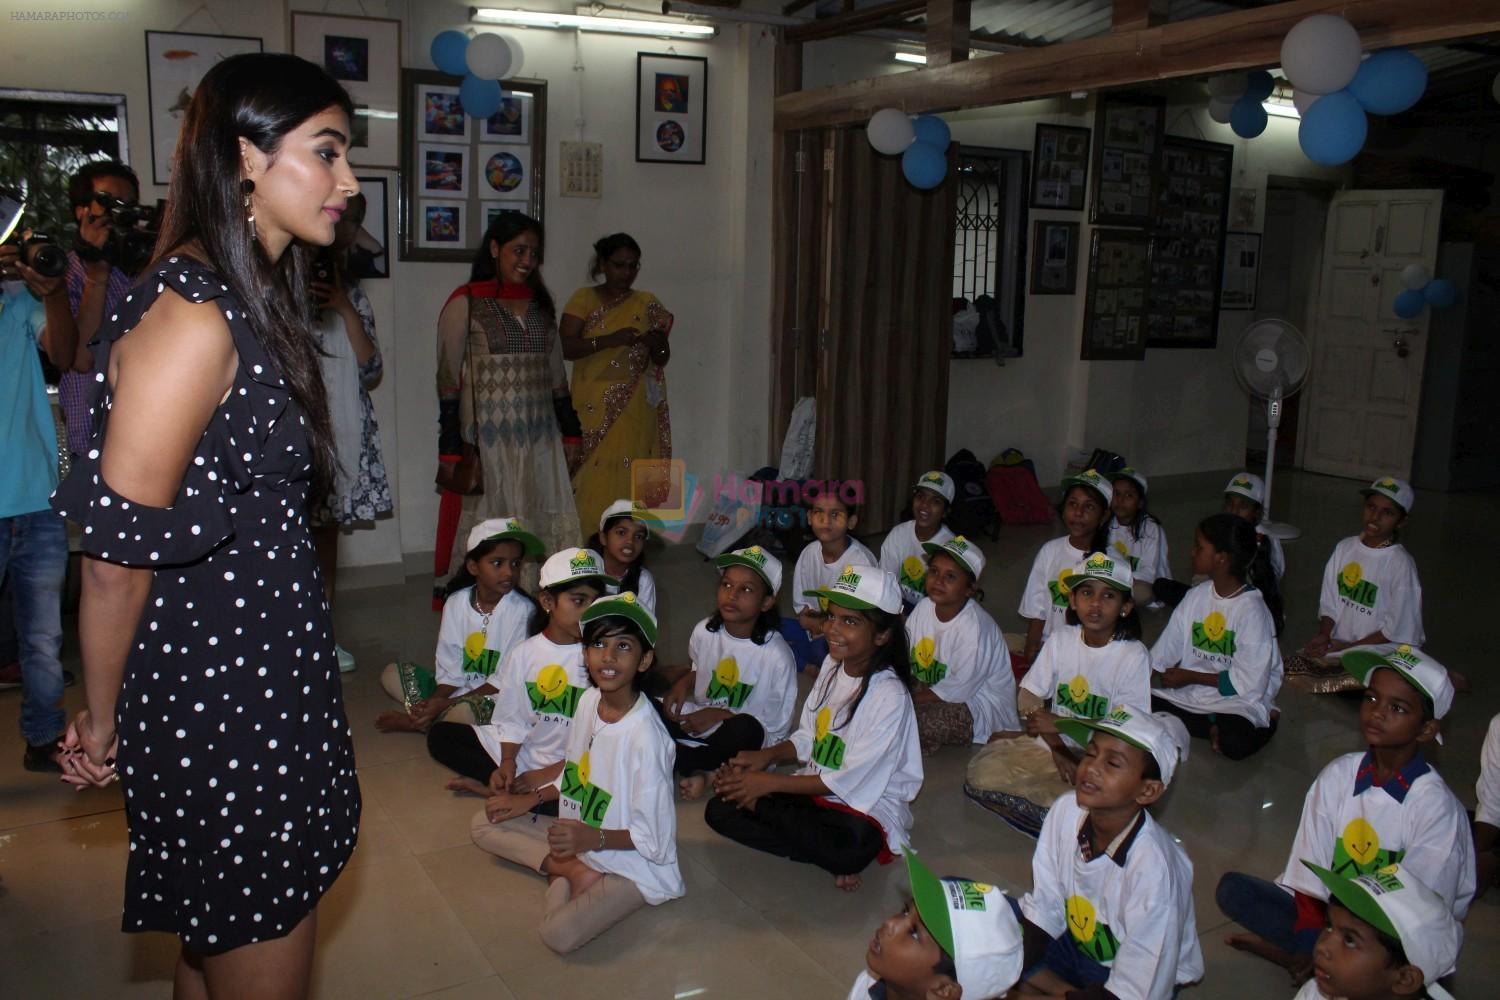 Pooja Hegde Celebrate Her Birthday With Smile Foundation Kids on 13th Oct 2017